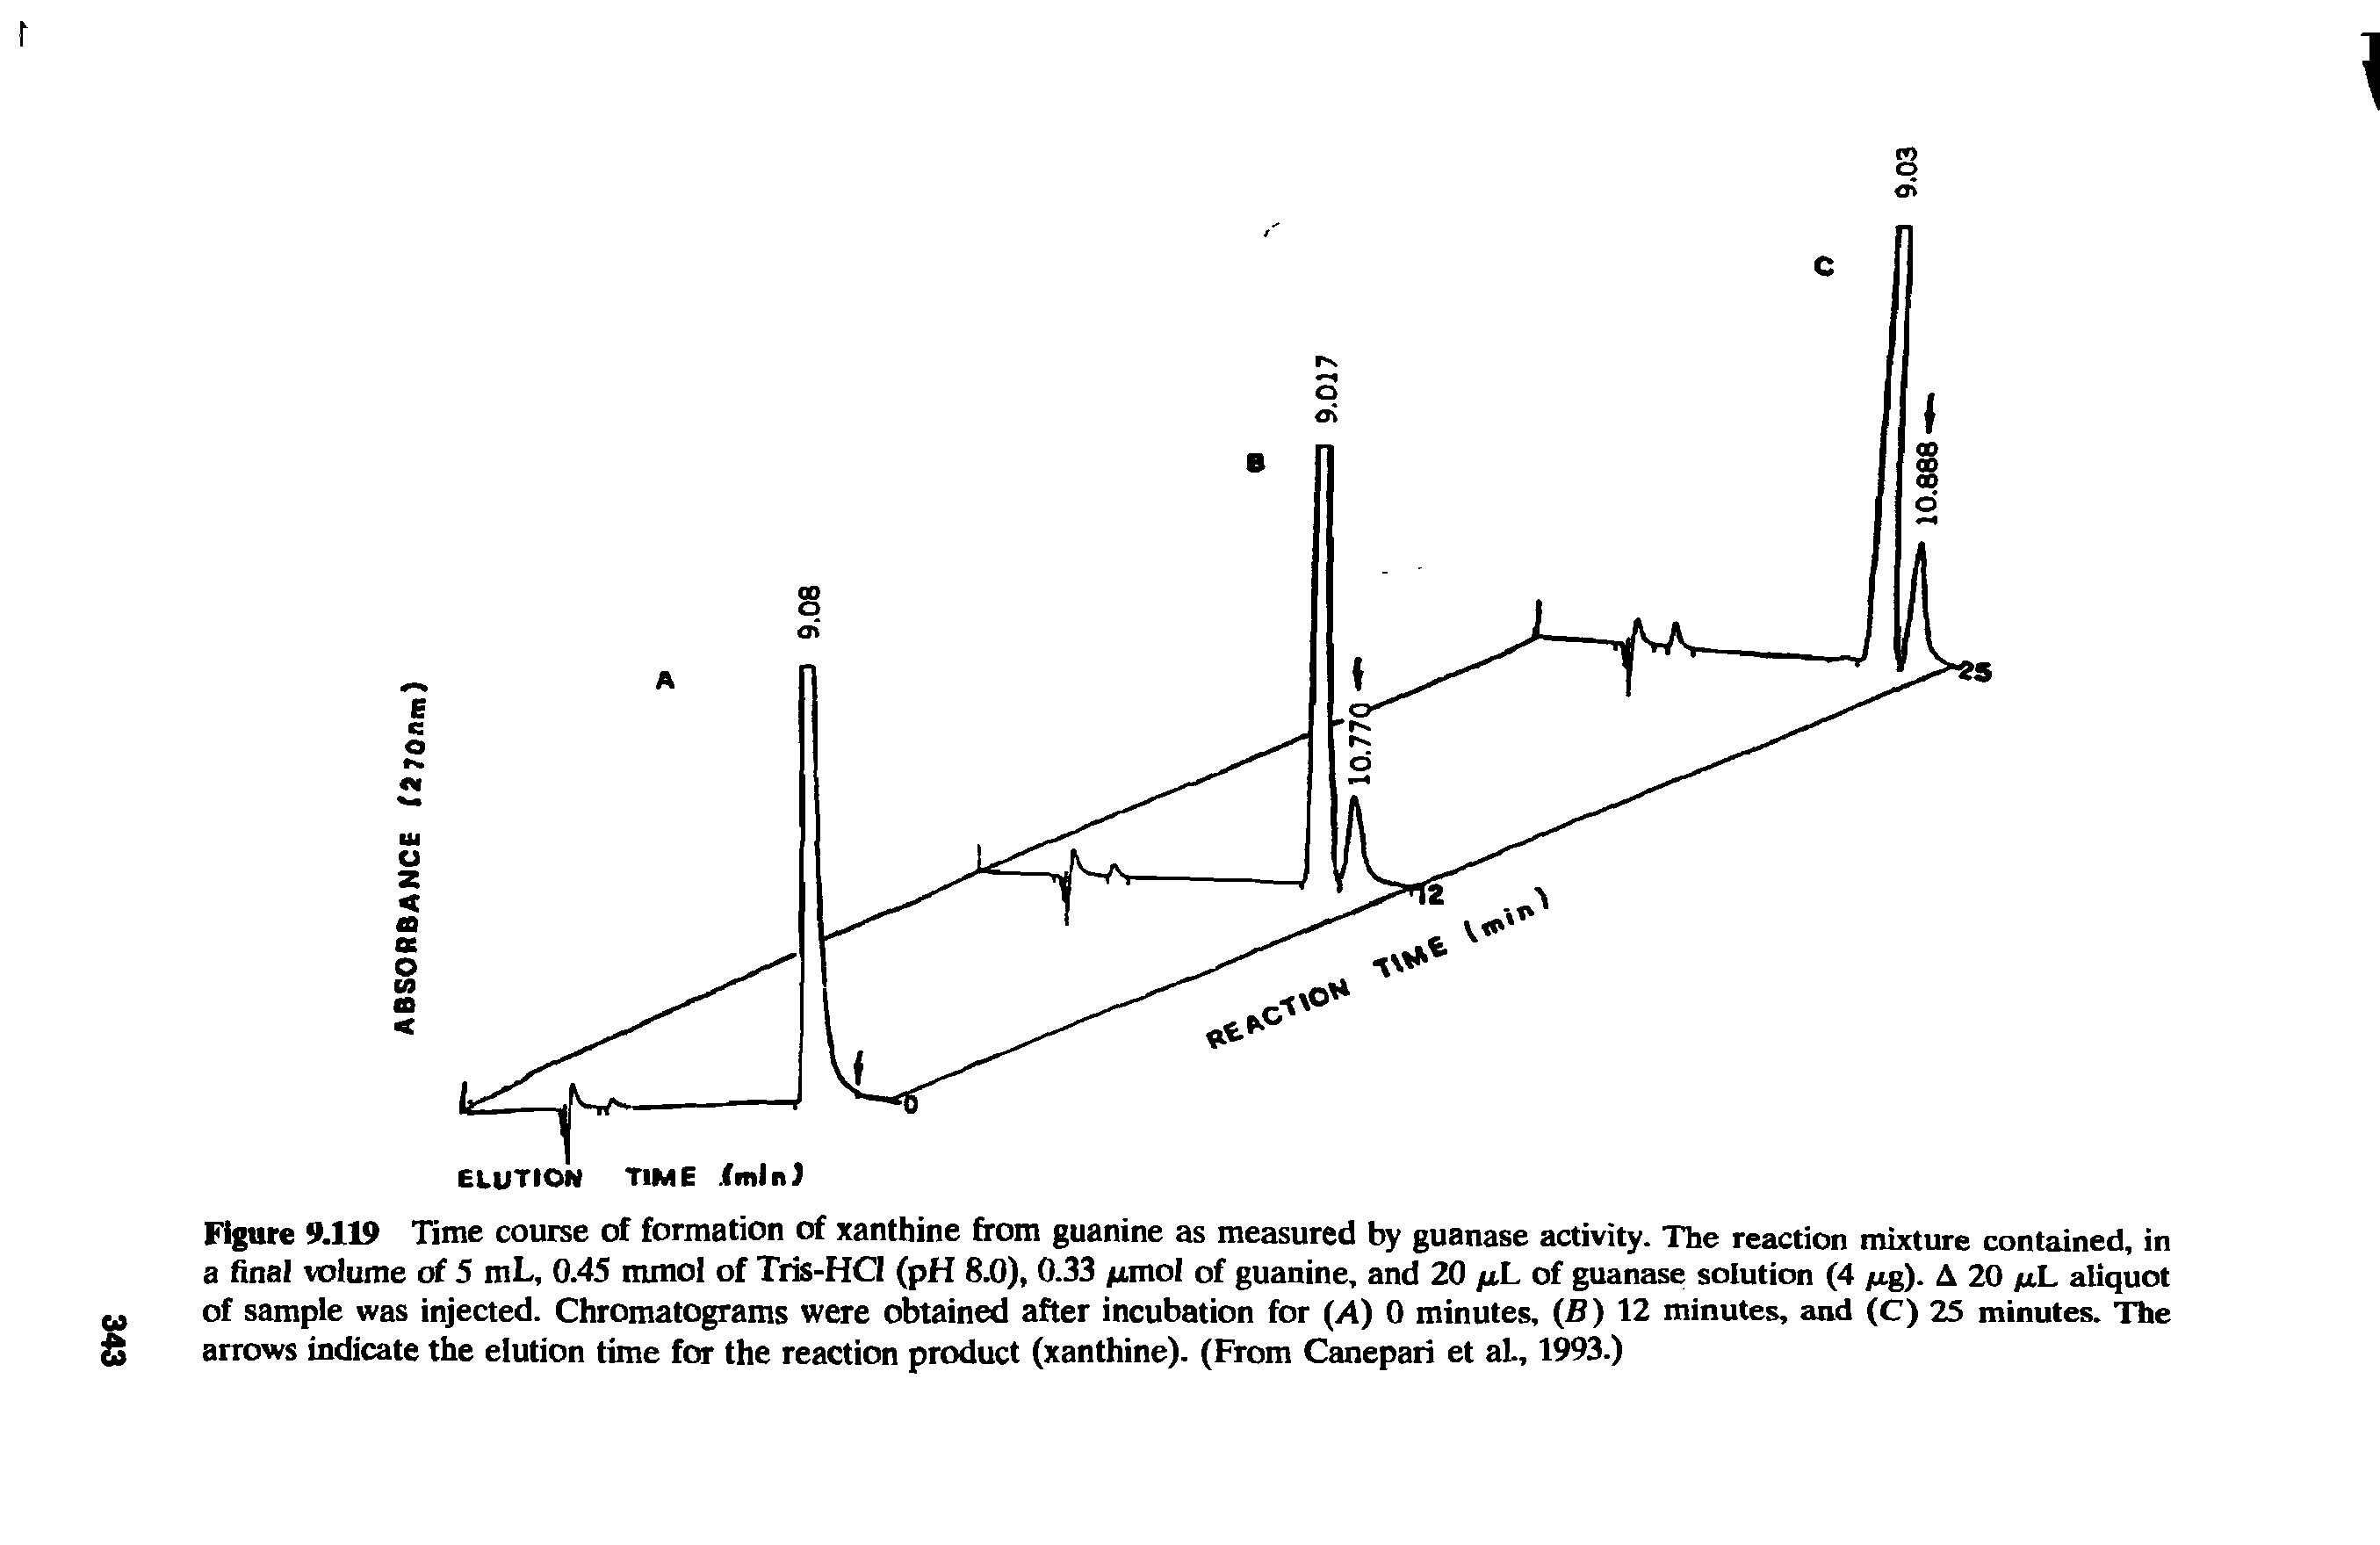 Figure 9.119 Time course of formation of xanthine from guanine as measured by guanase activity. The reaction mixture contained, in a final volume of 5 mL, 0.45 mmol of Tris-HCI (pH 8.0), 0.33 puno of guanine, and 20 ftL of guanase solution (4 yxg). A 20 /xL aliquot M of sample was injected. Chromatograms were obtained after incubation for (A) 0 minutes, (B) 12 minutes, and (C) 25 minutes. The S arrows indicate the elution time for the reaction product (xanthine). (From Canepari et aL, 1993.)...